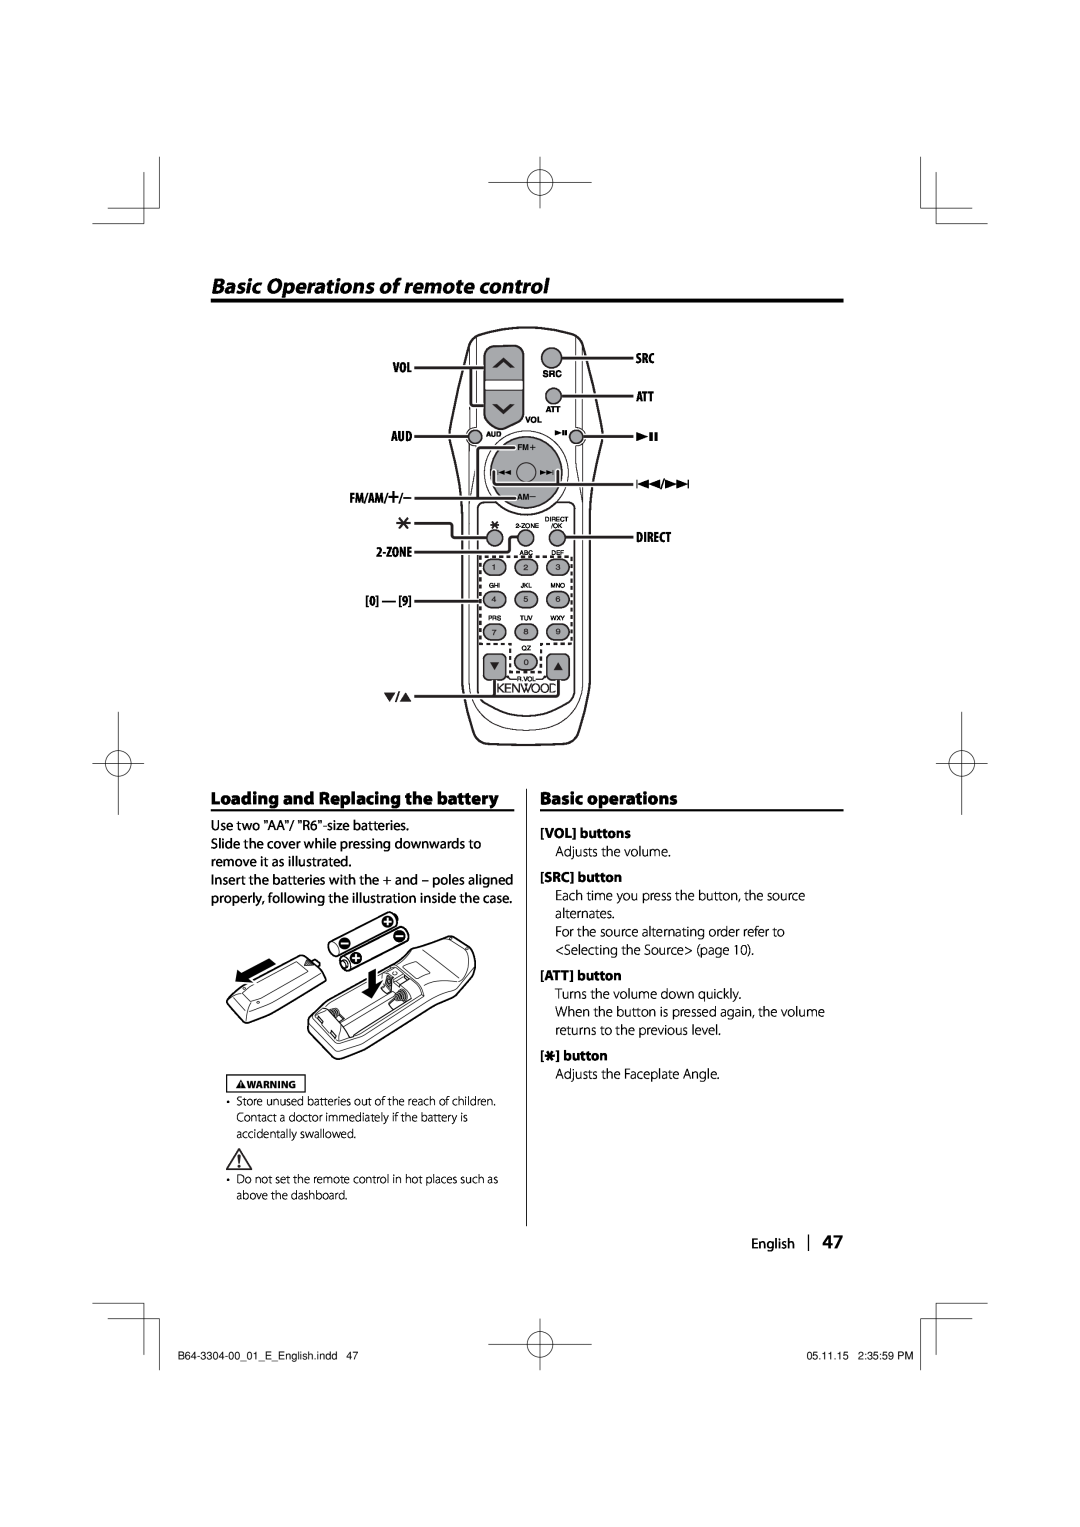 Dolby Laboratories KDC-W8534 Basic Operations of remote control, Loading and Replacing the battery, Basic operations, Zone 